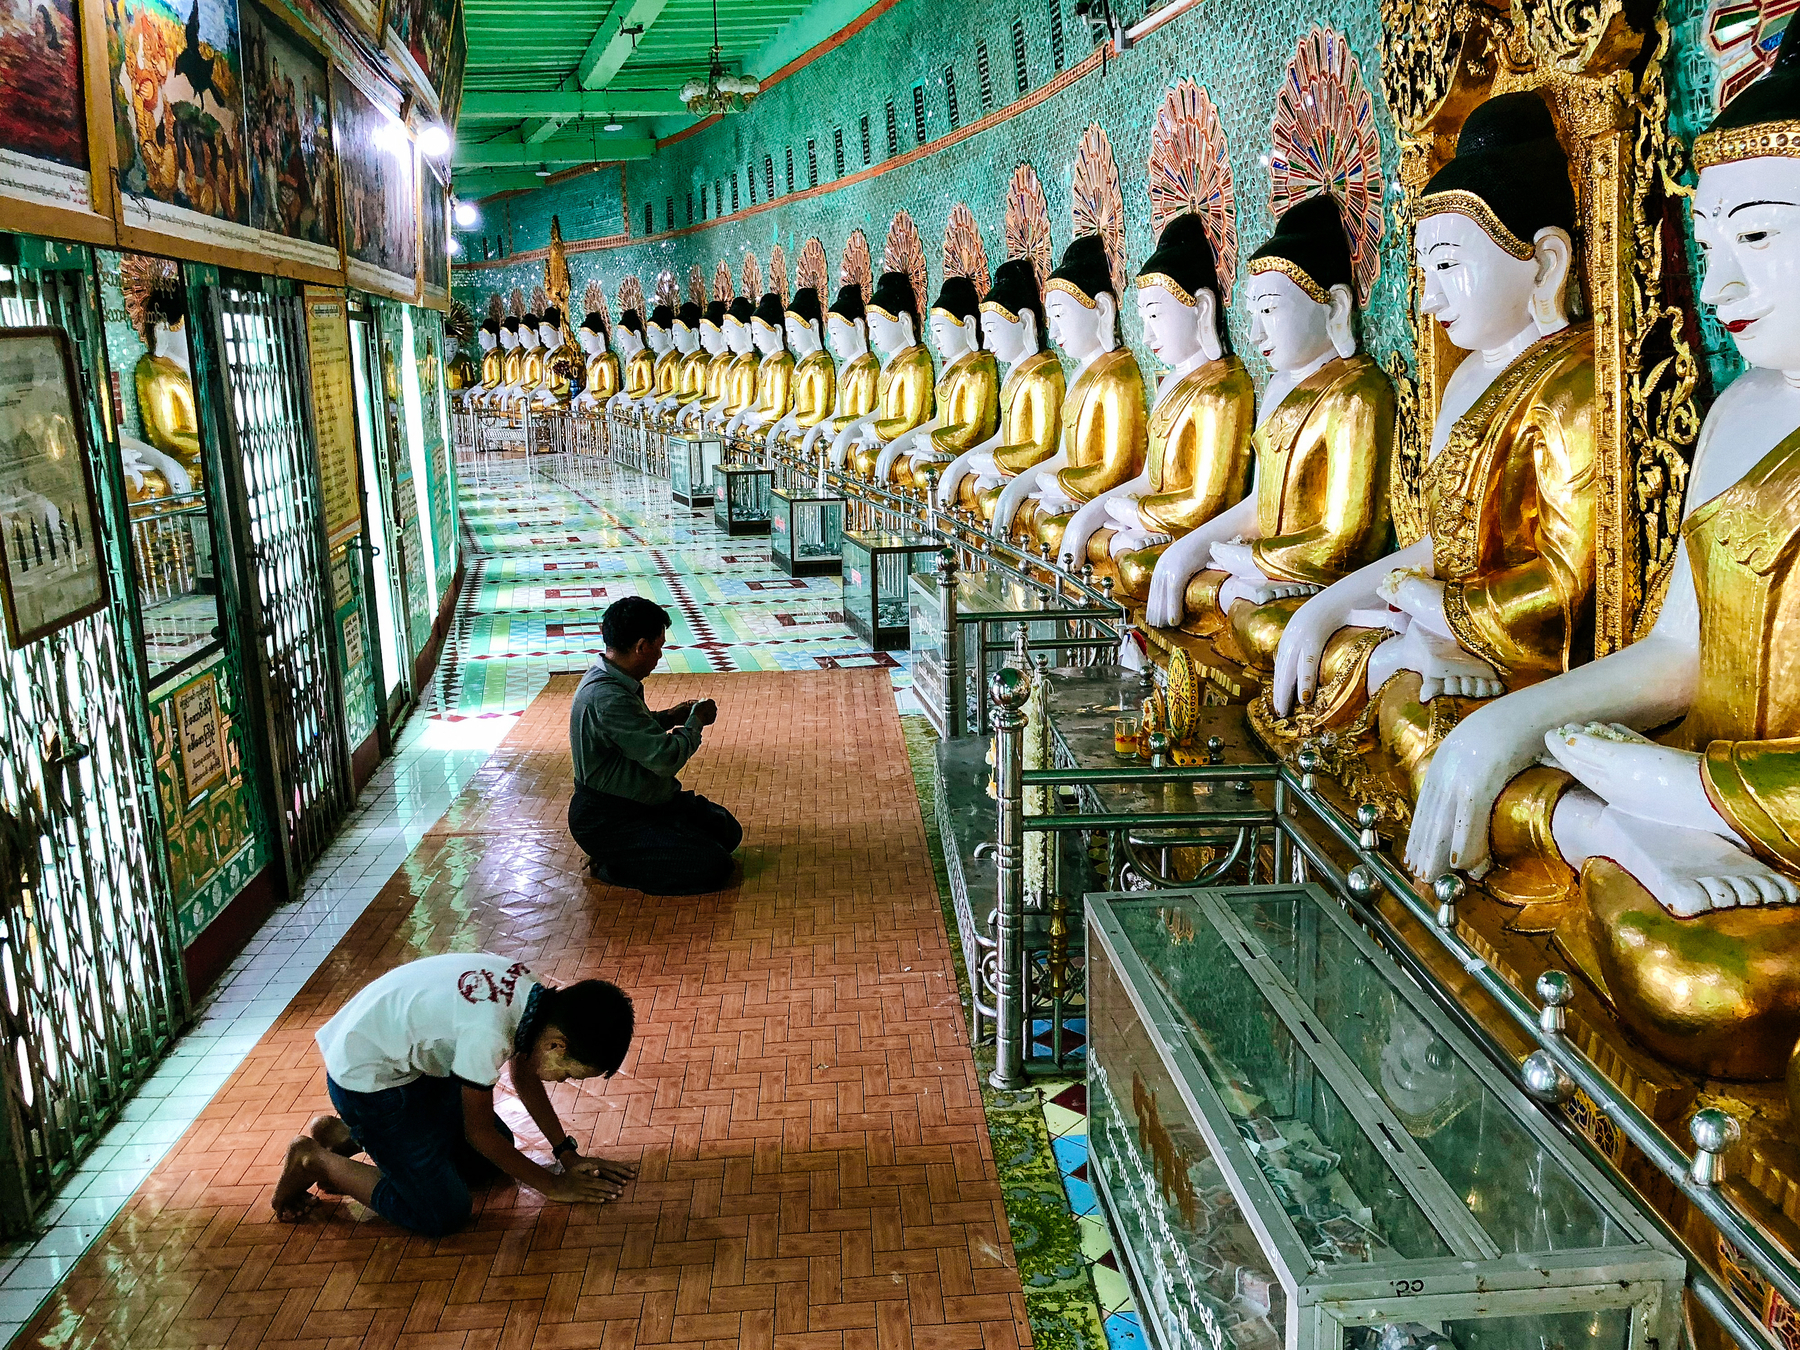 People pray inside a temple in Mandalay. The temple is mostly green, with a row of Buddha statues on the right side. 